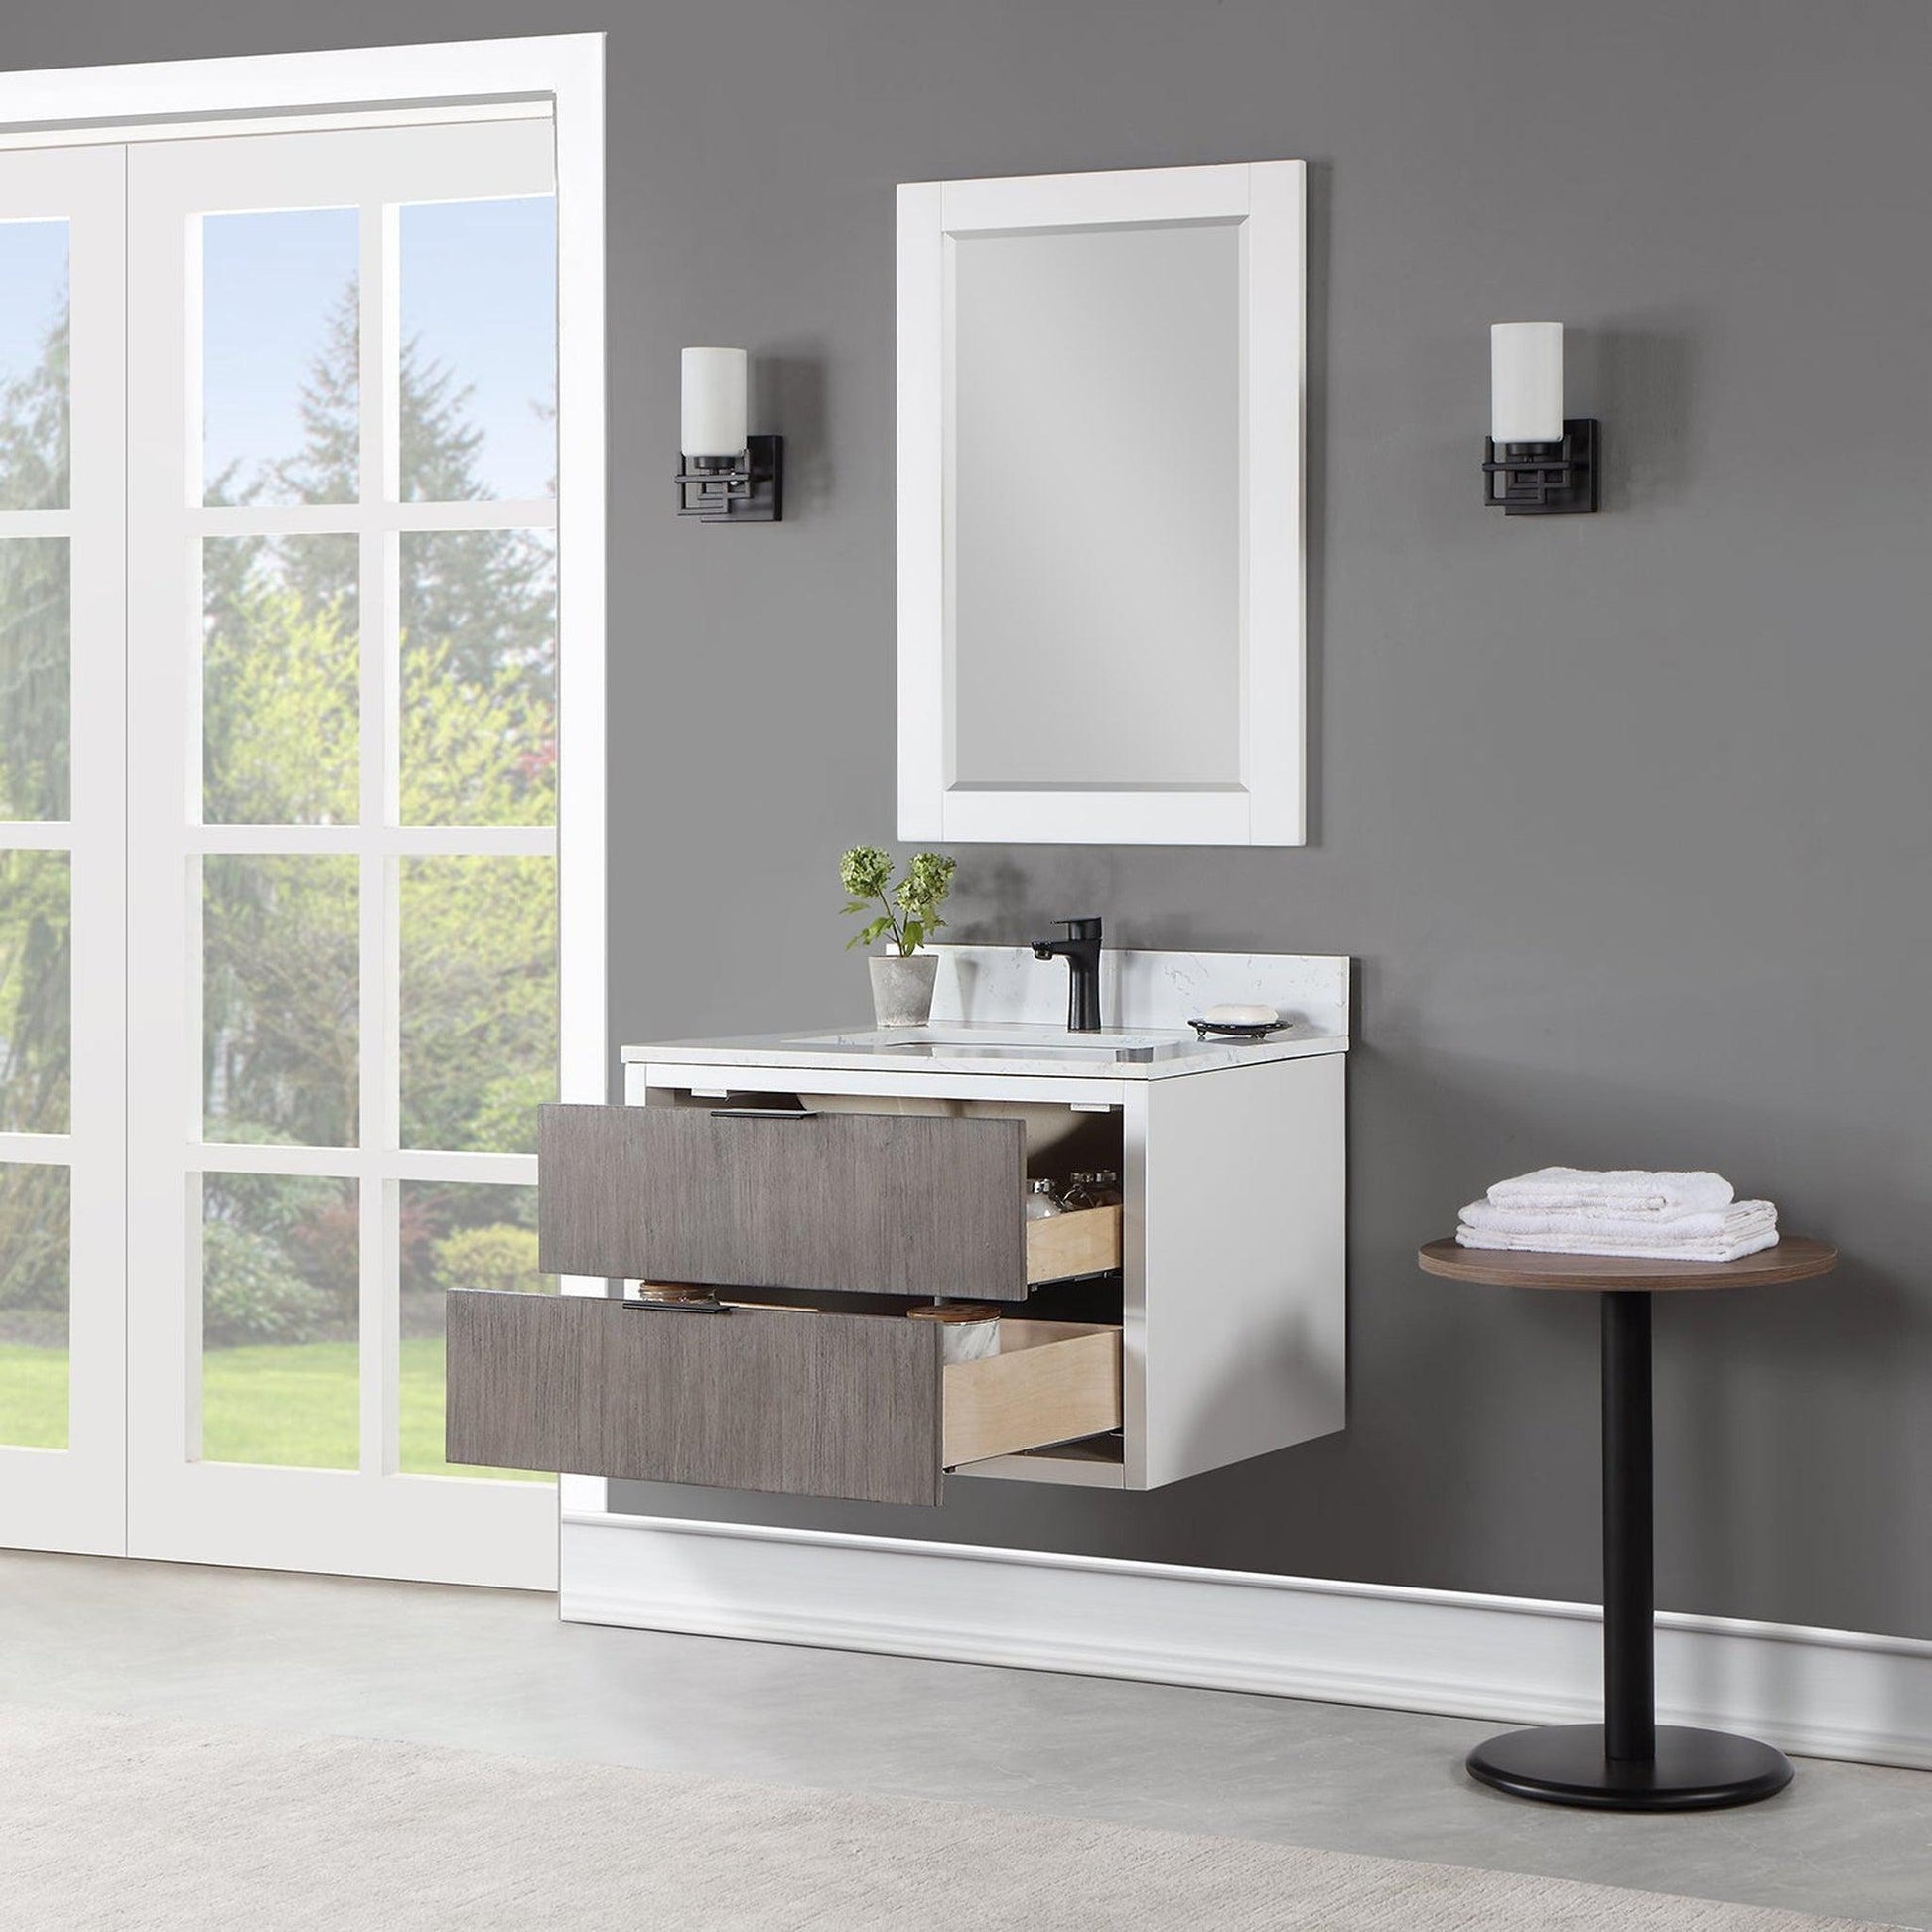 Altair Dione 30" Single Classical Gray Wall-Mounted Bathroom Vanity Set With Mirror, Aosta White Composite Stone Top, Single Rectangular Undermount Ceramic Sink, Overflow, and Backsplash